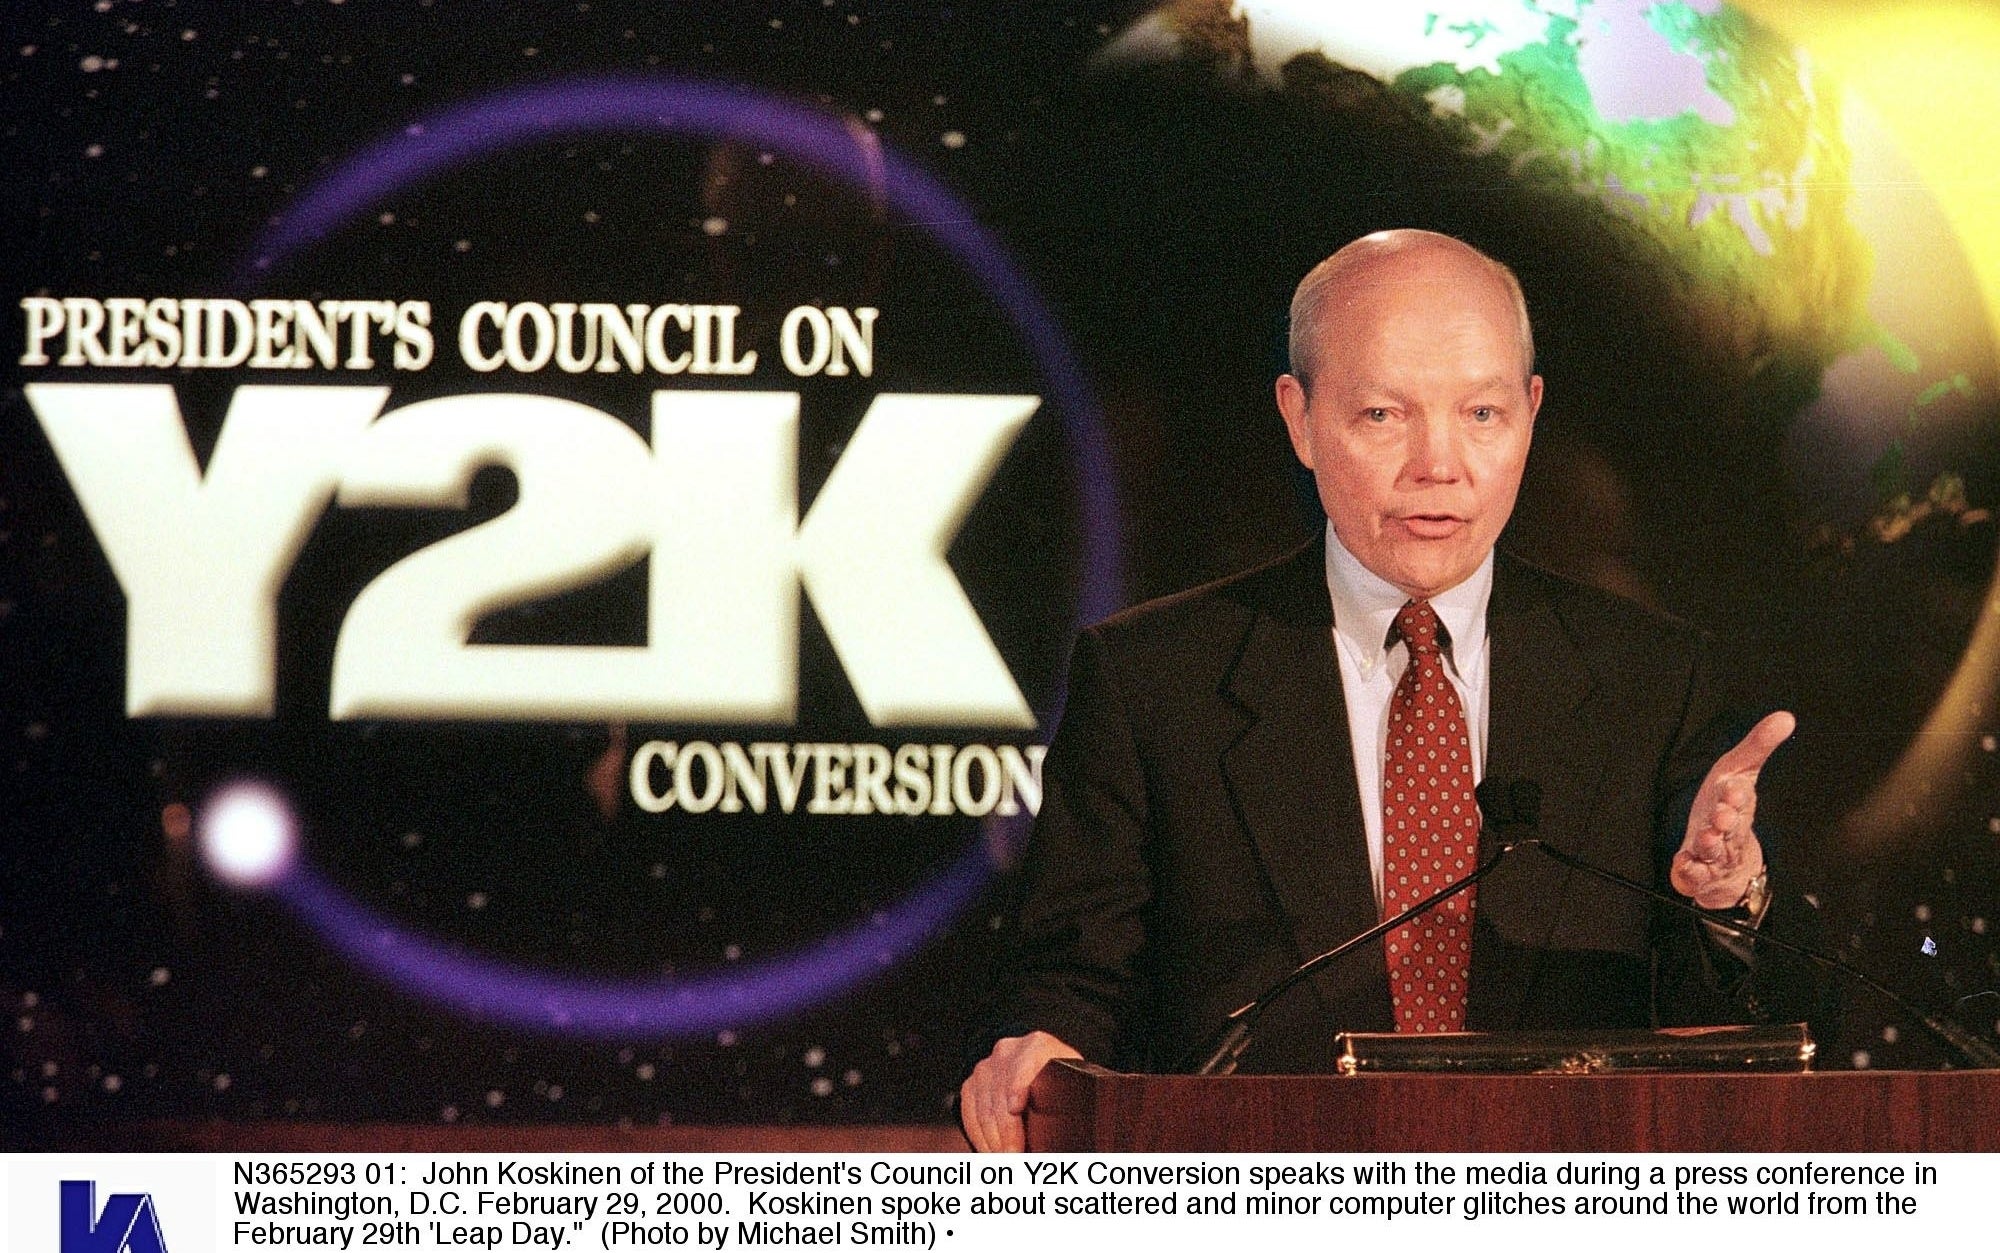 John Koskinen speaking for the president&#x27;s council on y2k conversion